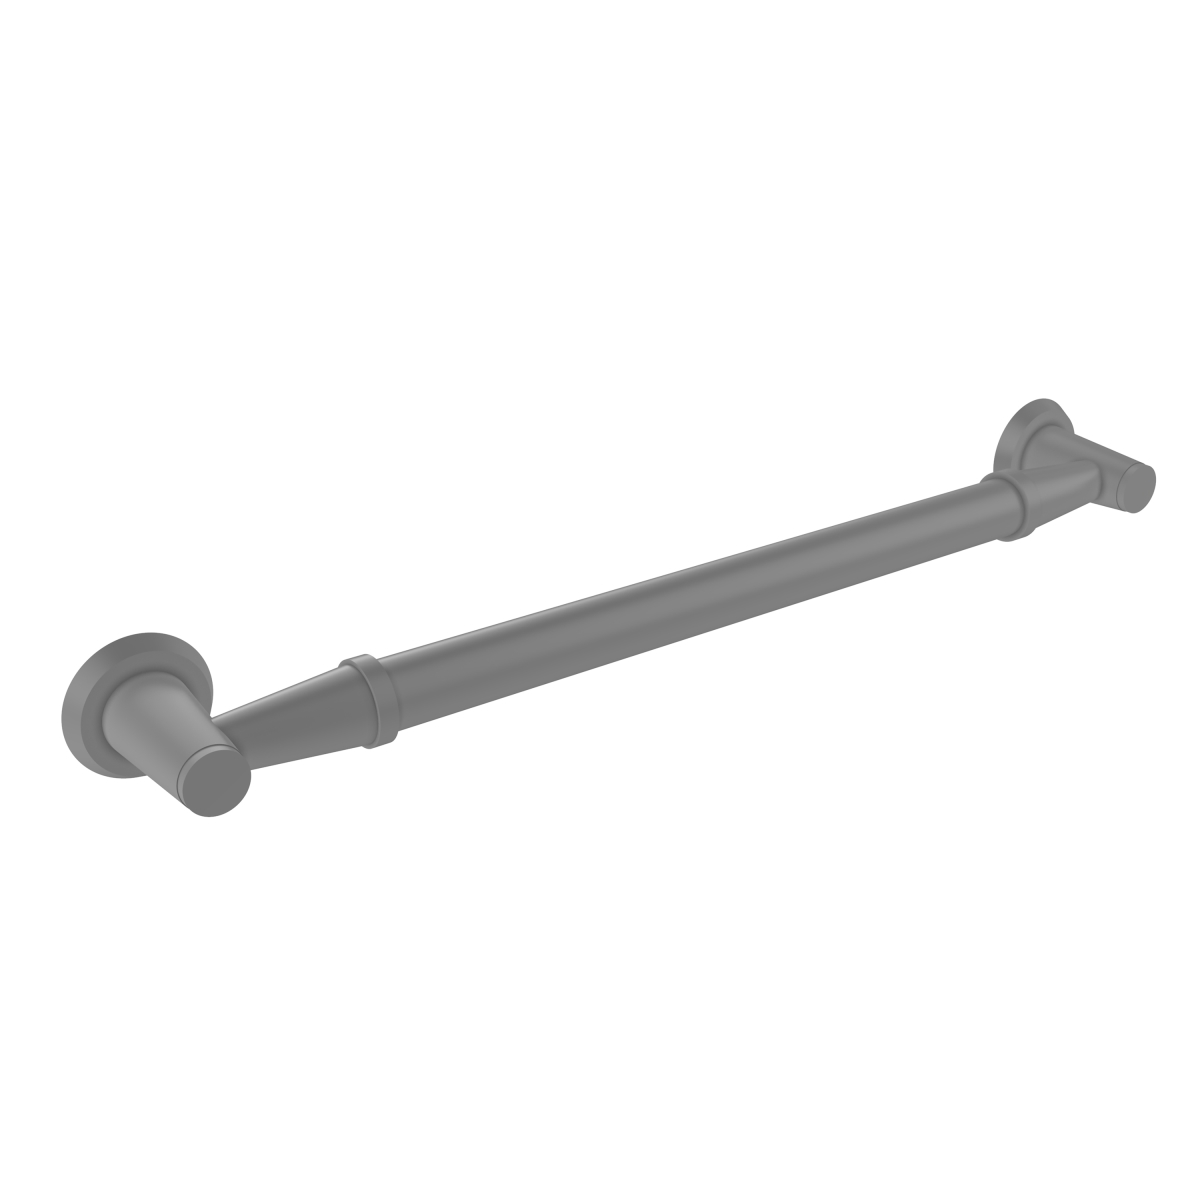 Picture of Allied Brass MD-GRS-24-GYM 24 in. Grab Bar Smooth, Matte Gray - 3.5 x 26 x 24 in.